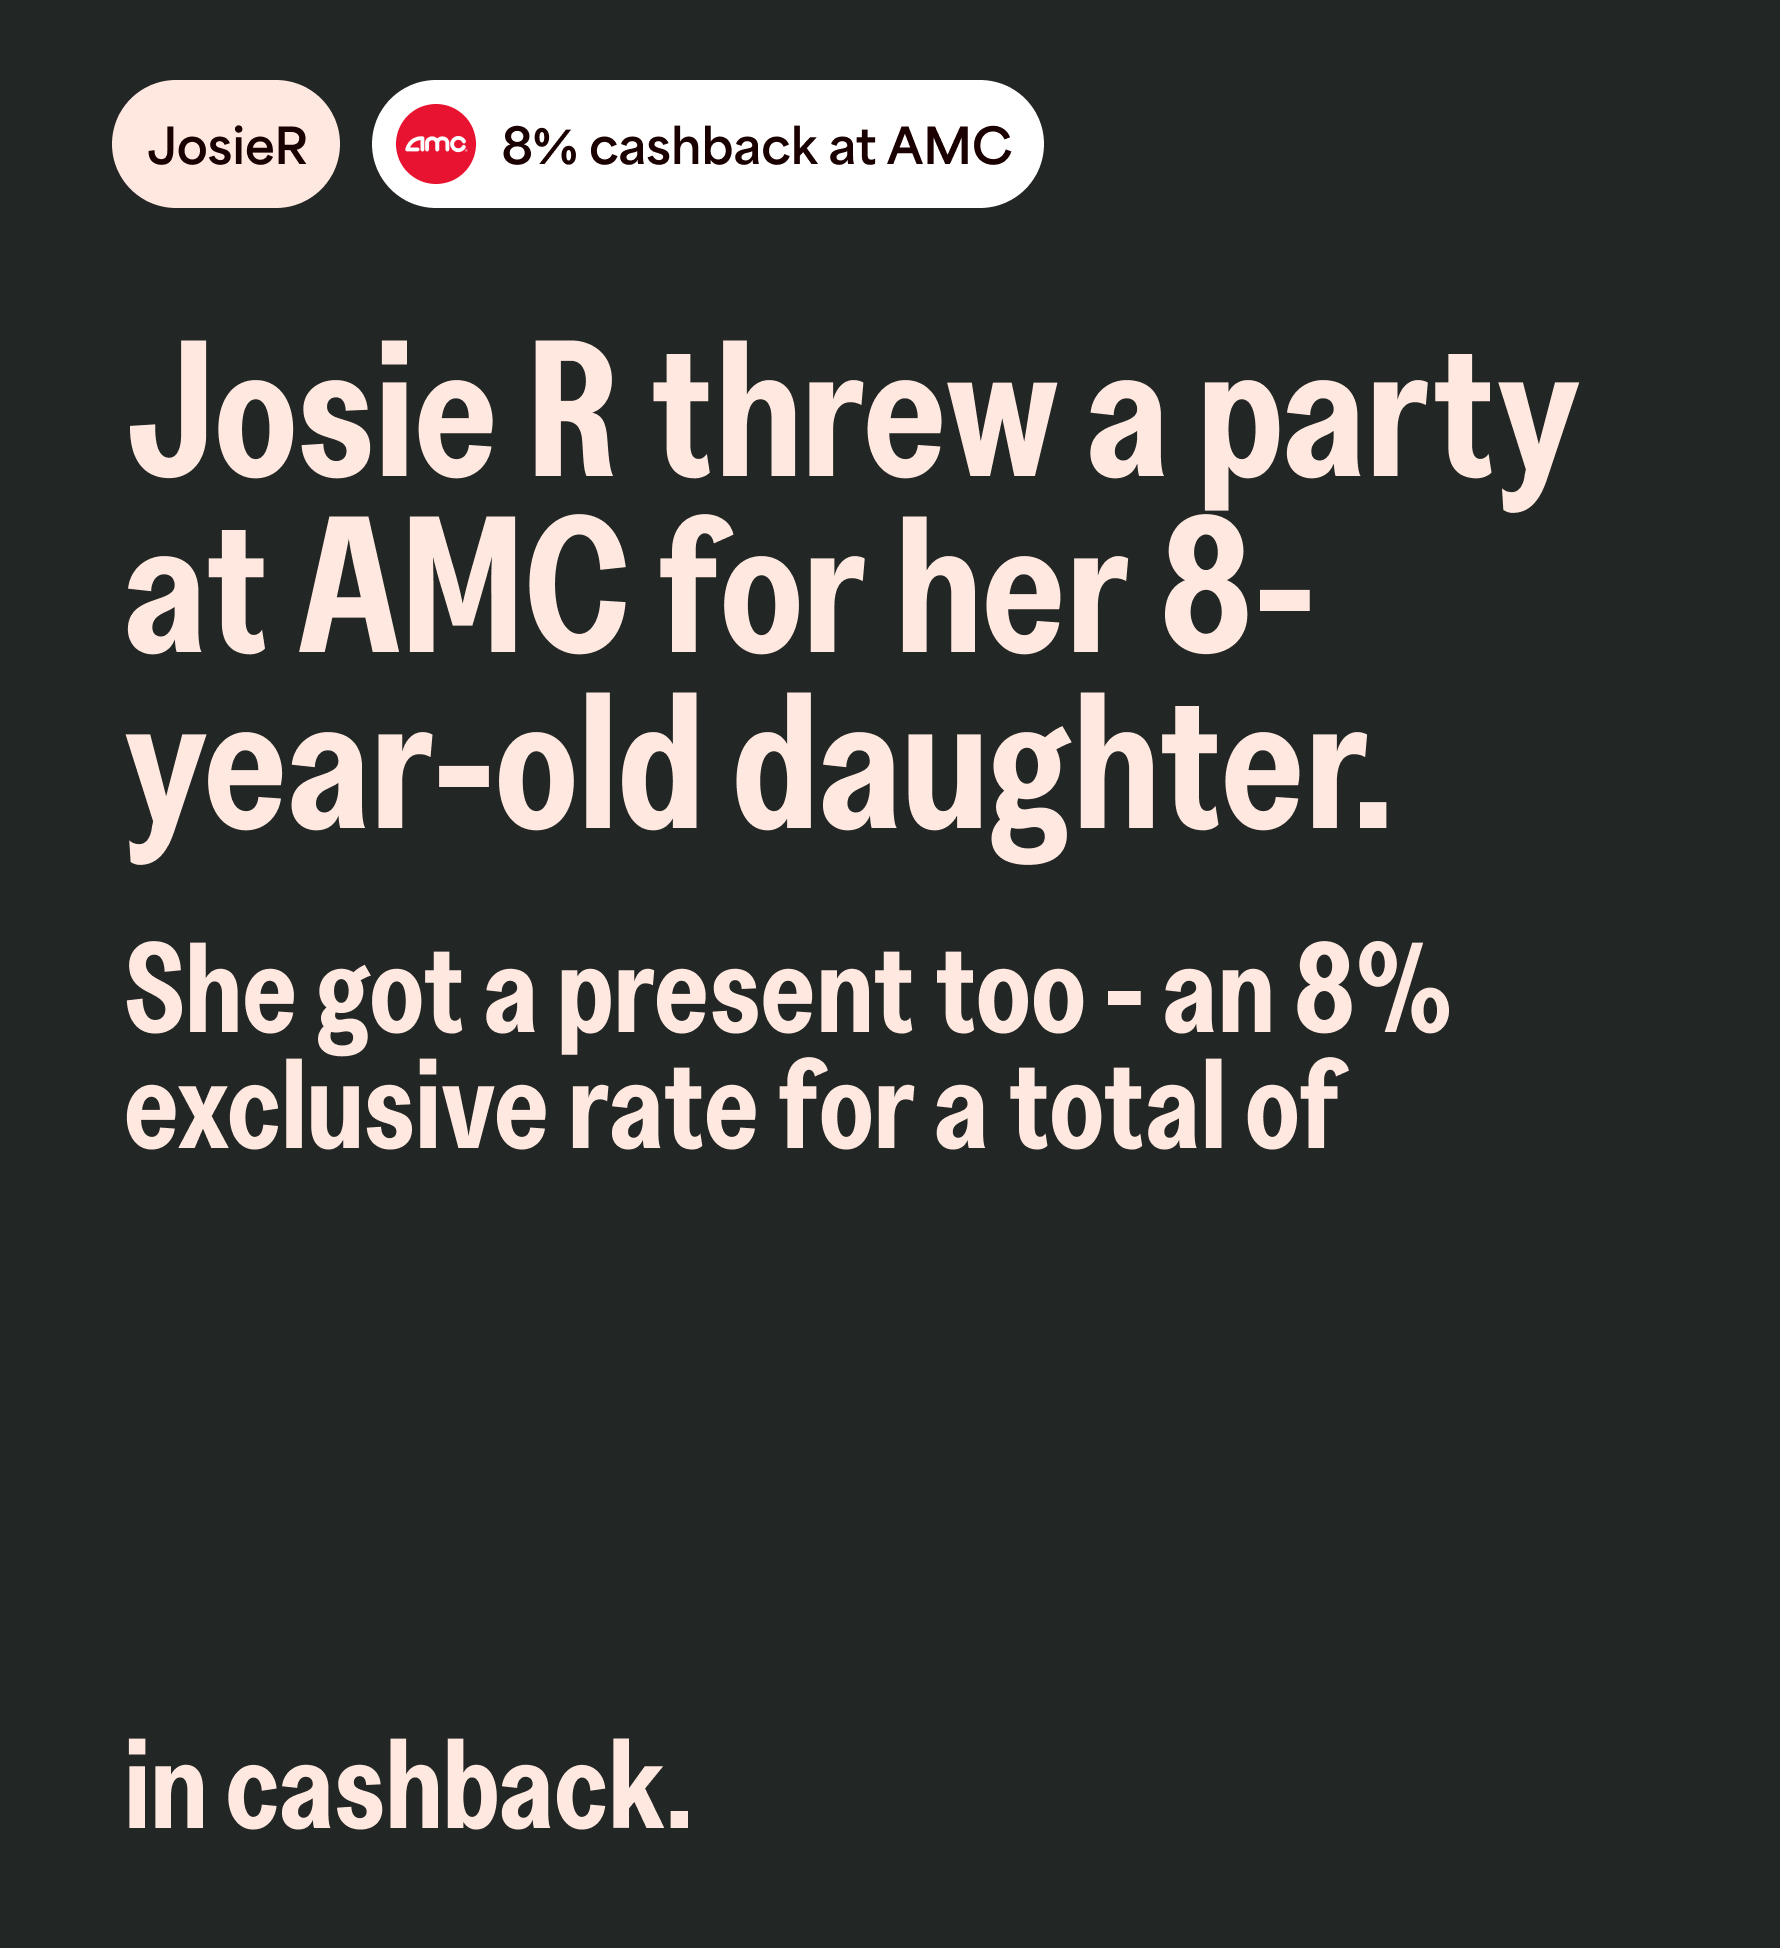 JosieR 8% cashback at AMC. Josie R threw a party at AMC for her 8-year-old daughter. She got a present too - an 8% exclusive rate for a total of in cashback.